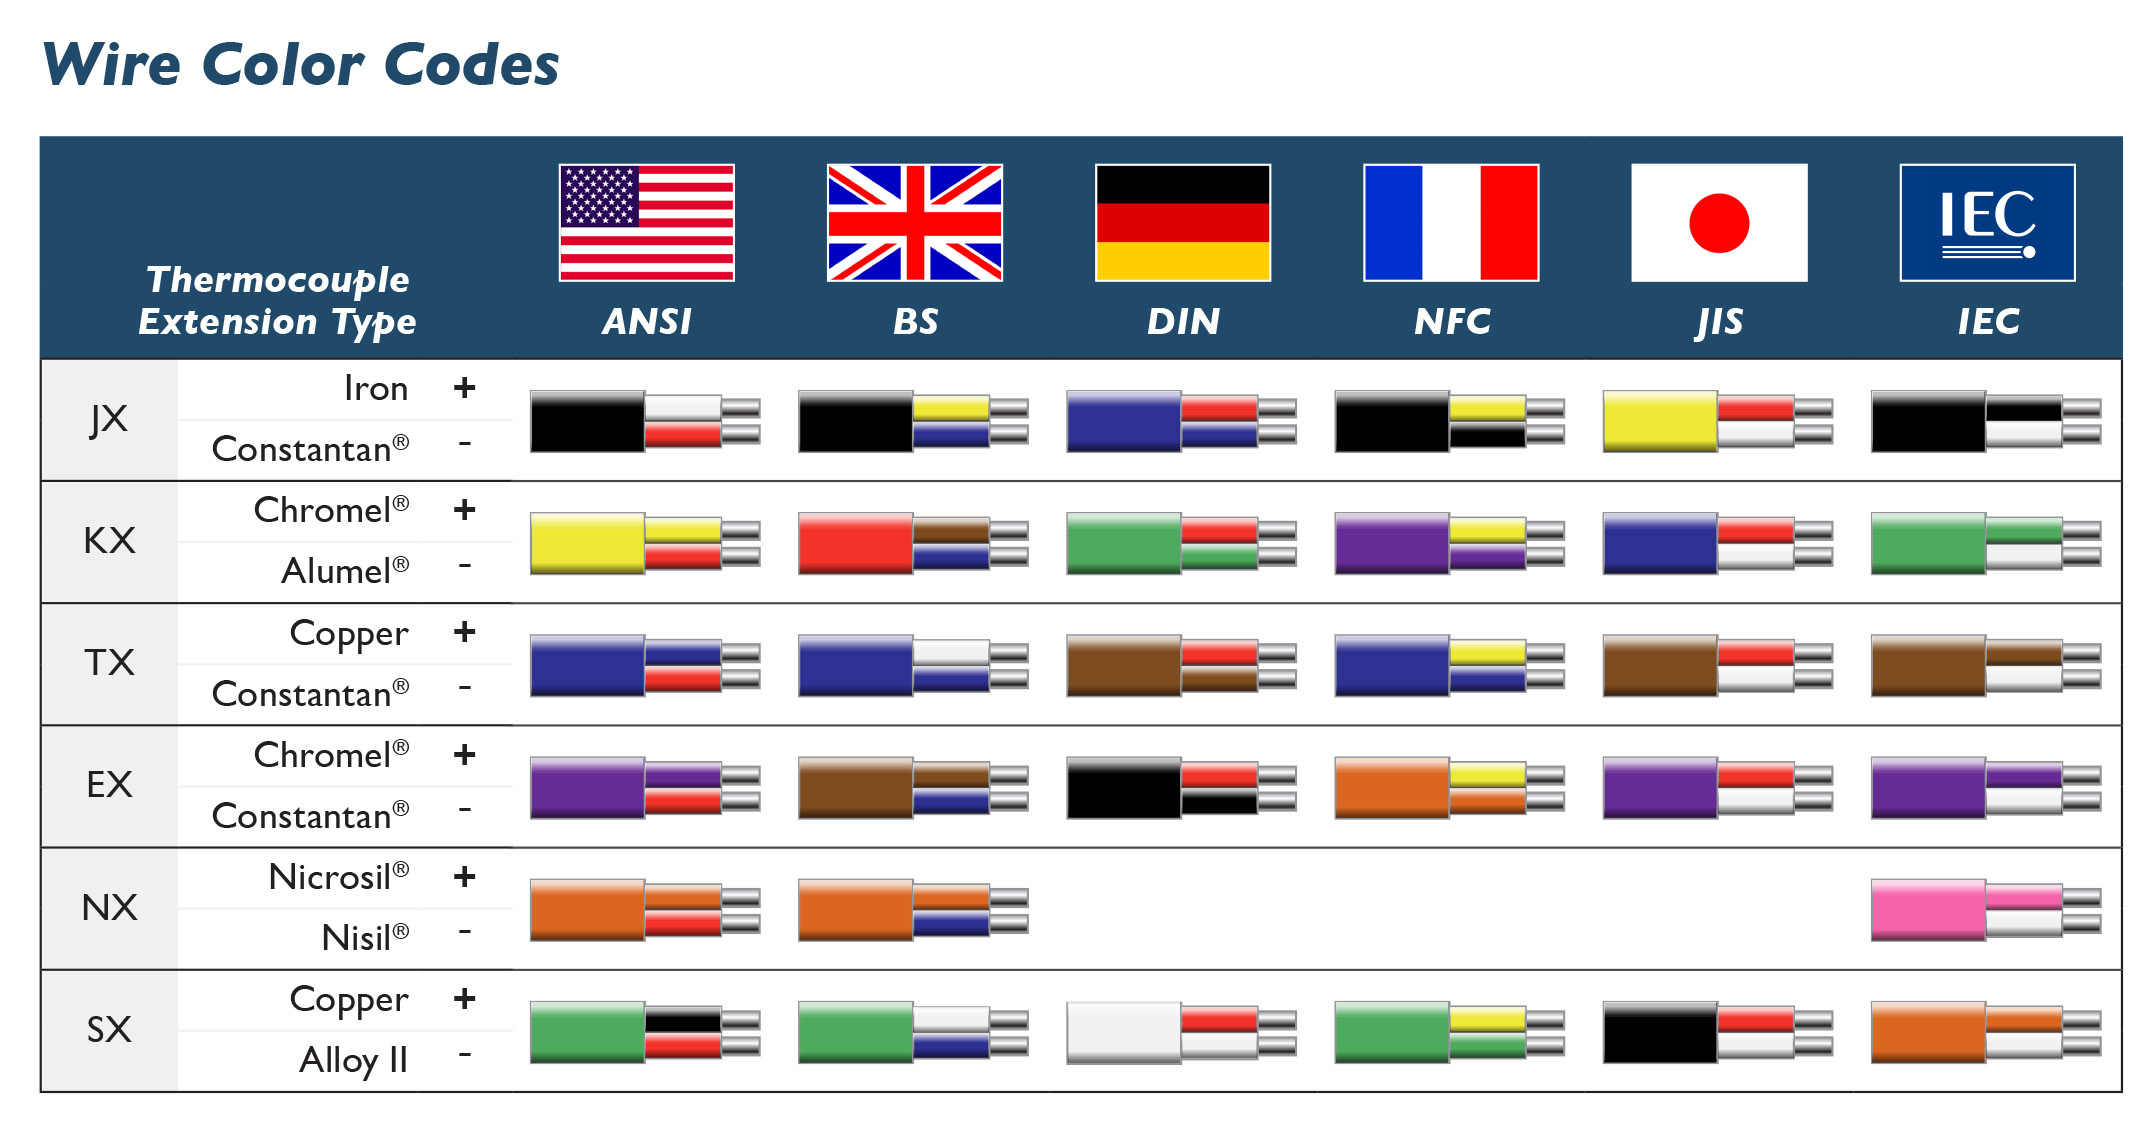 International Color Codes | TE Wire & Cable | Thermocouple Wire ...